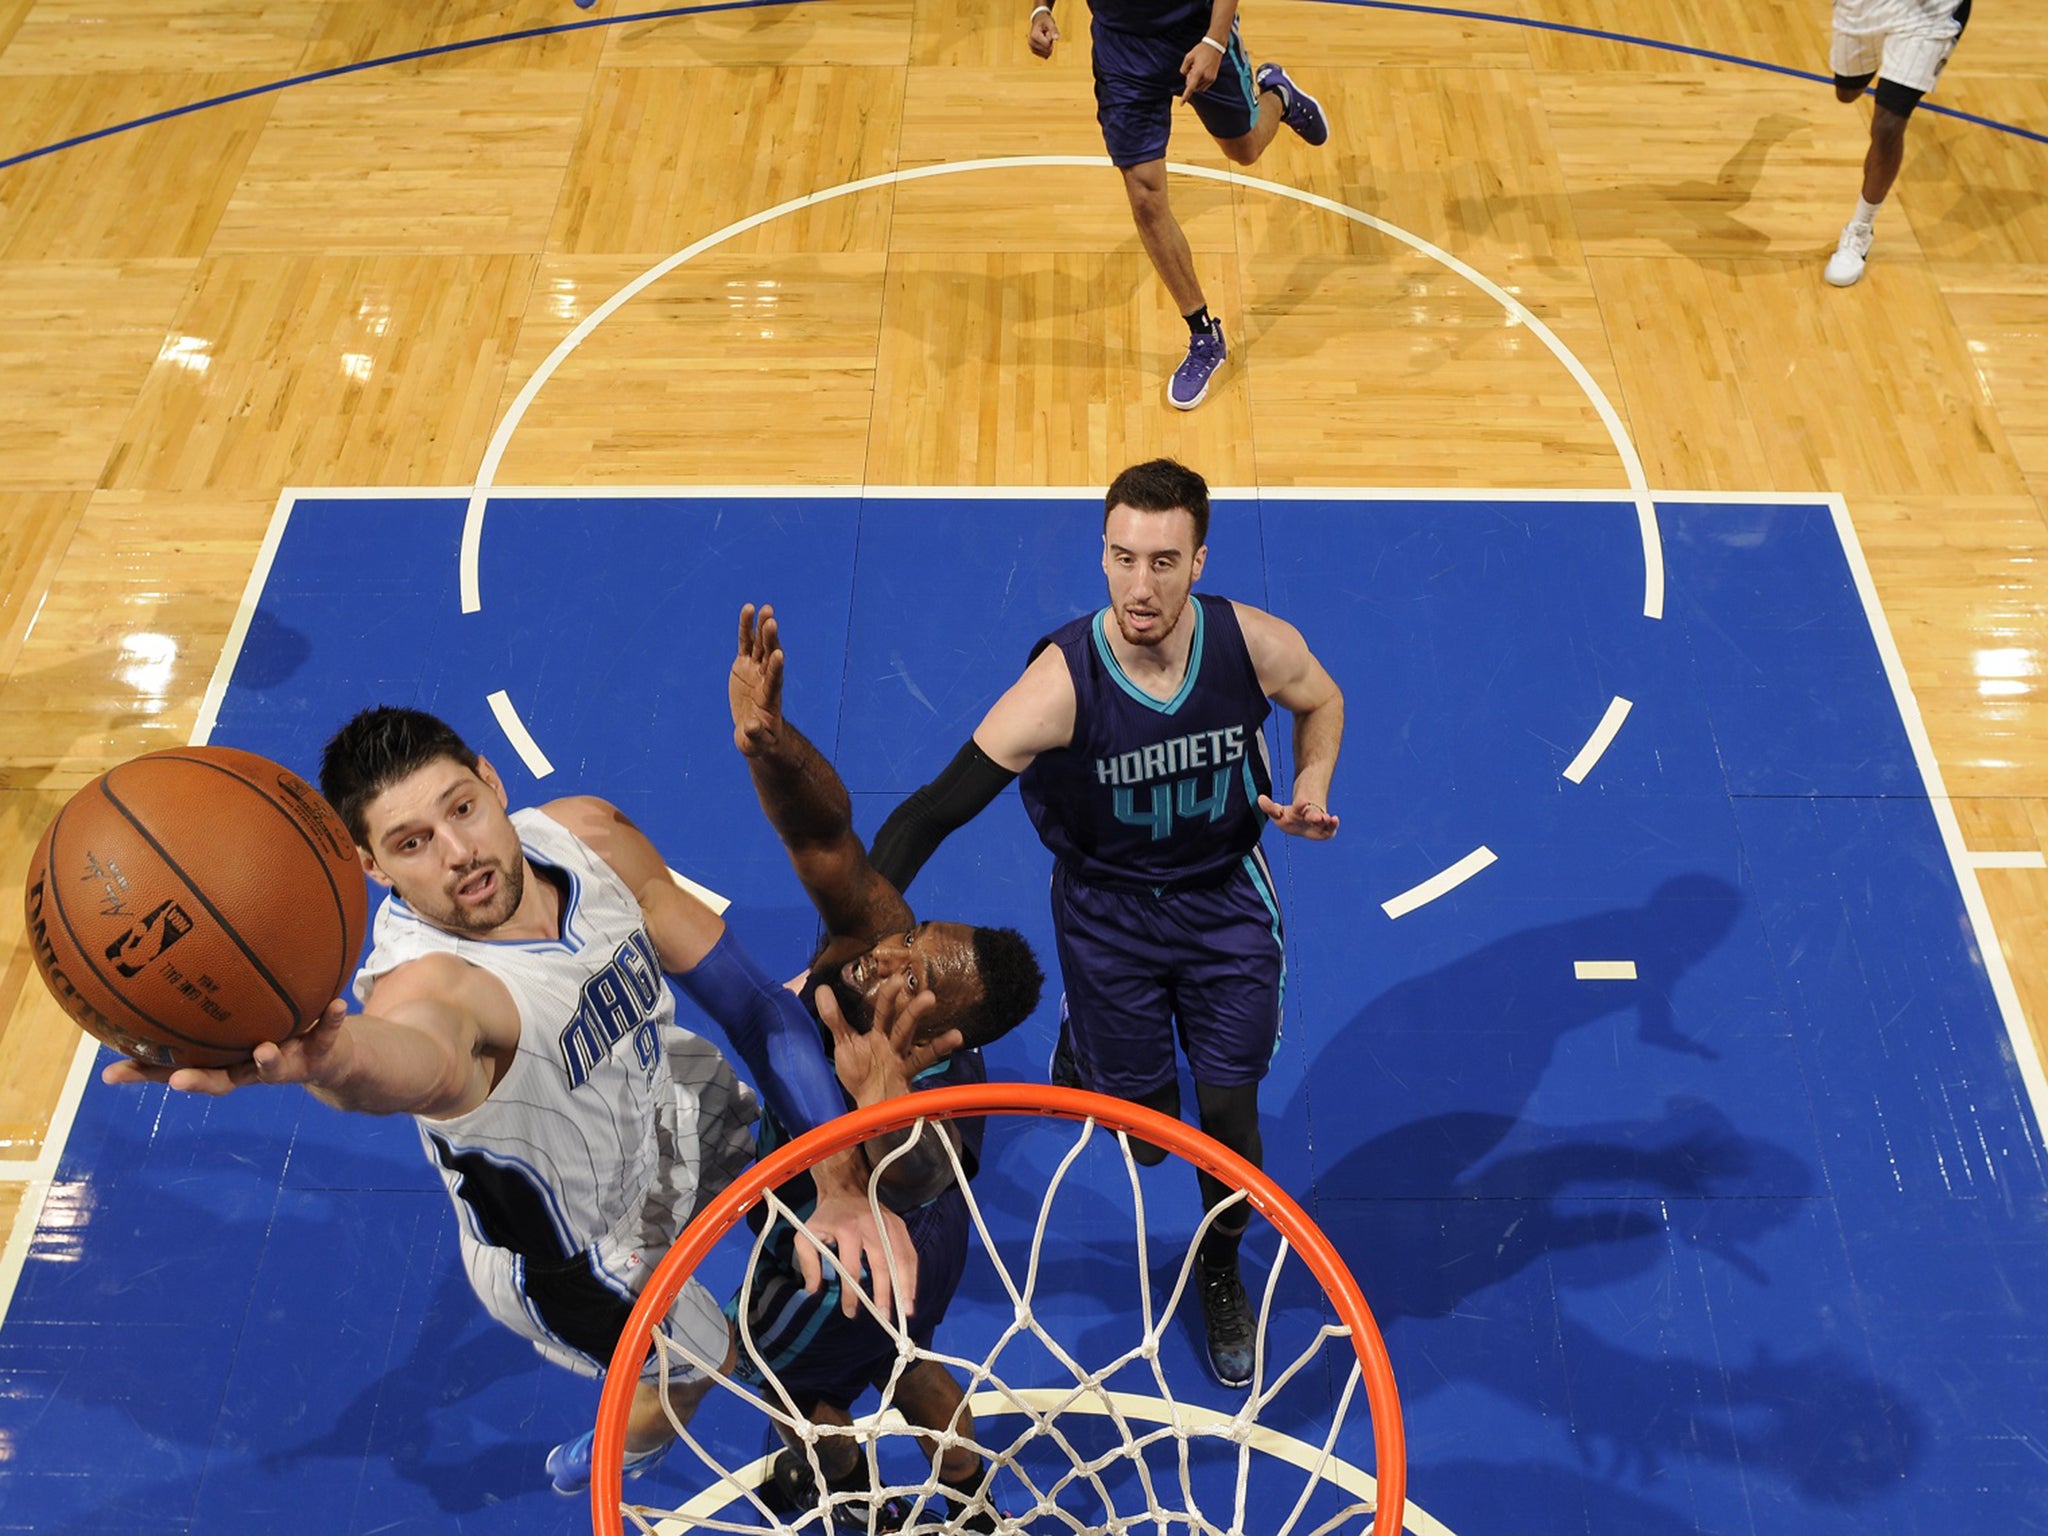 &#13;
Vucevic leads Orlando in points and rebounds this season&#13;